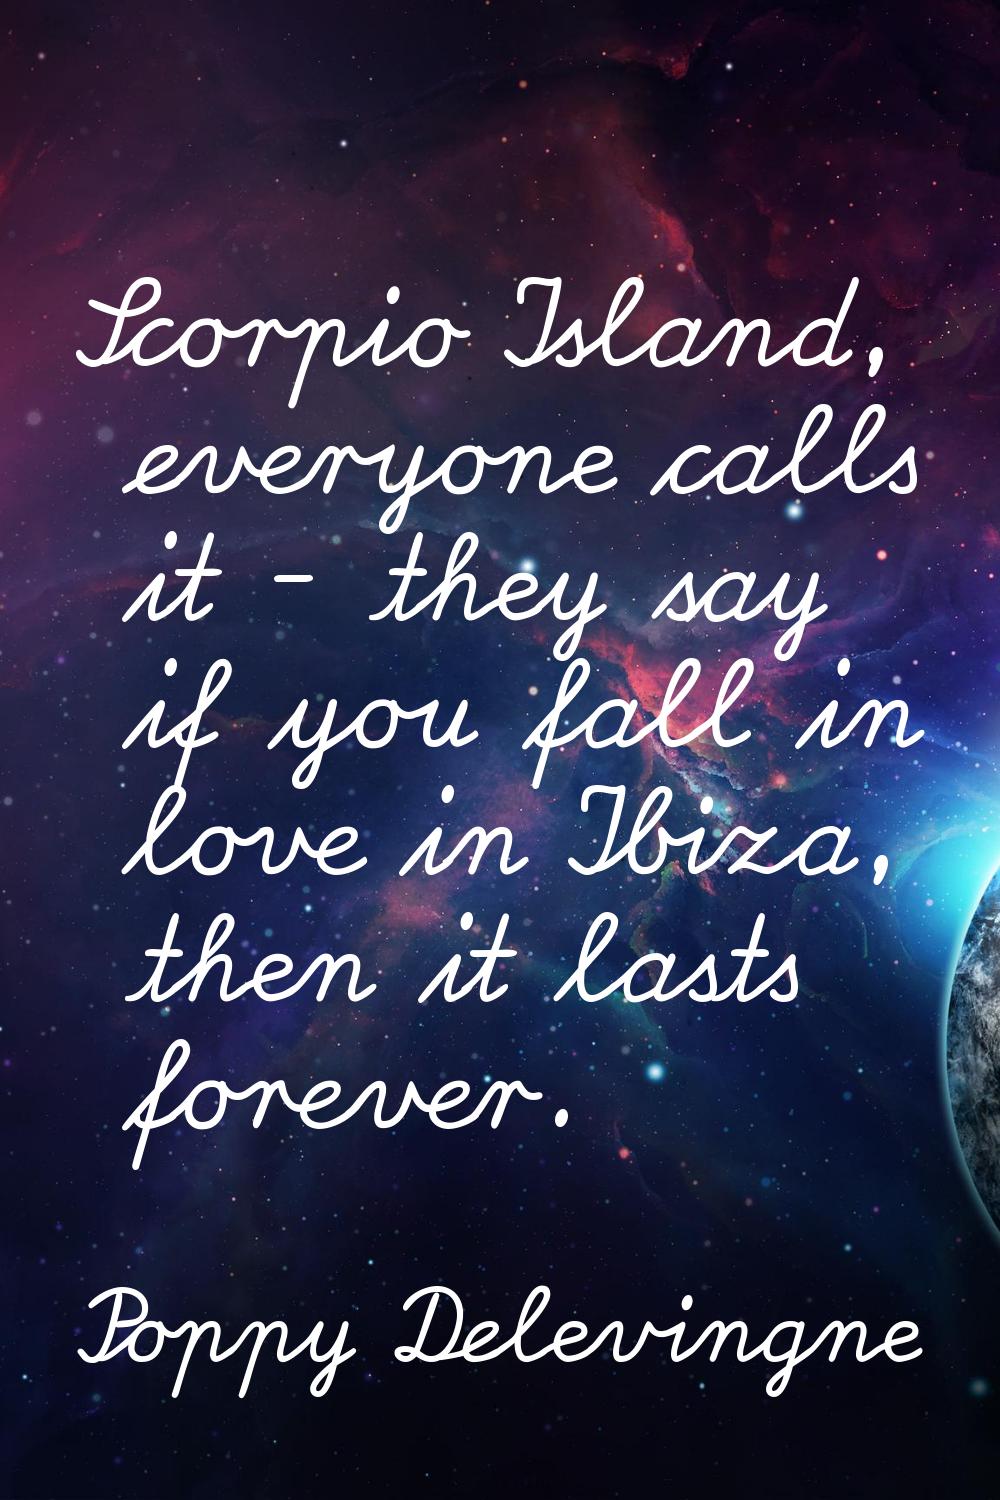 Scorpio Island, everyone calls it - they say if you fall in love in Ibiza, then it lasts forever.